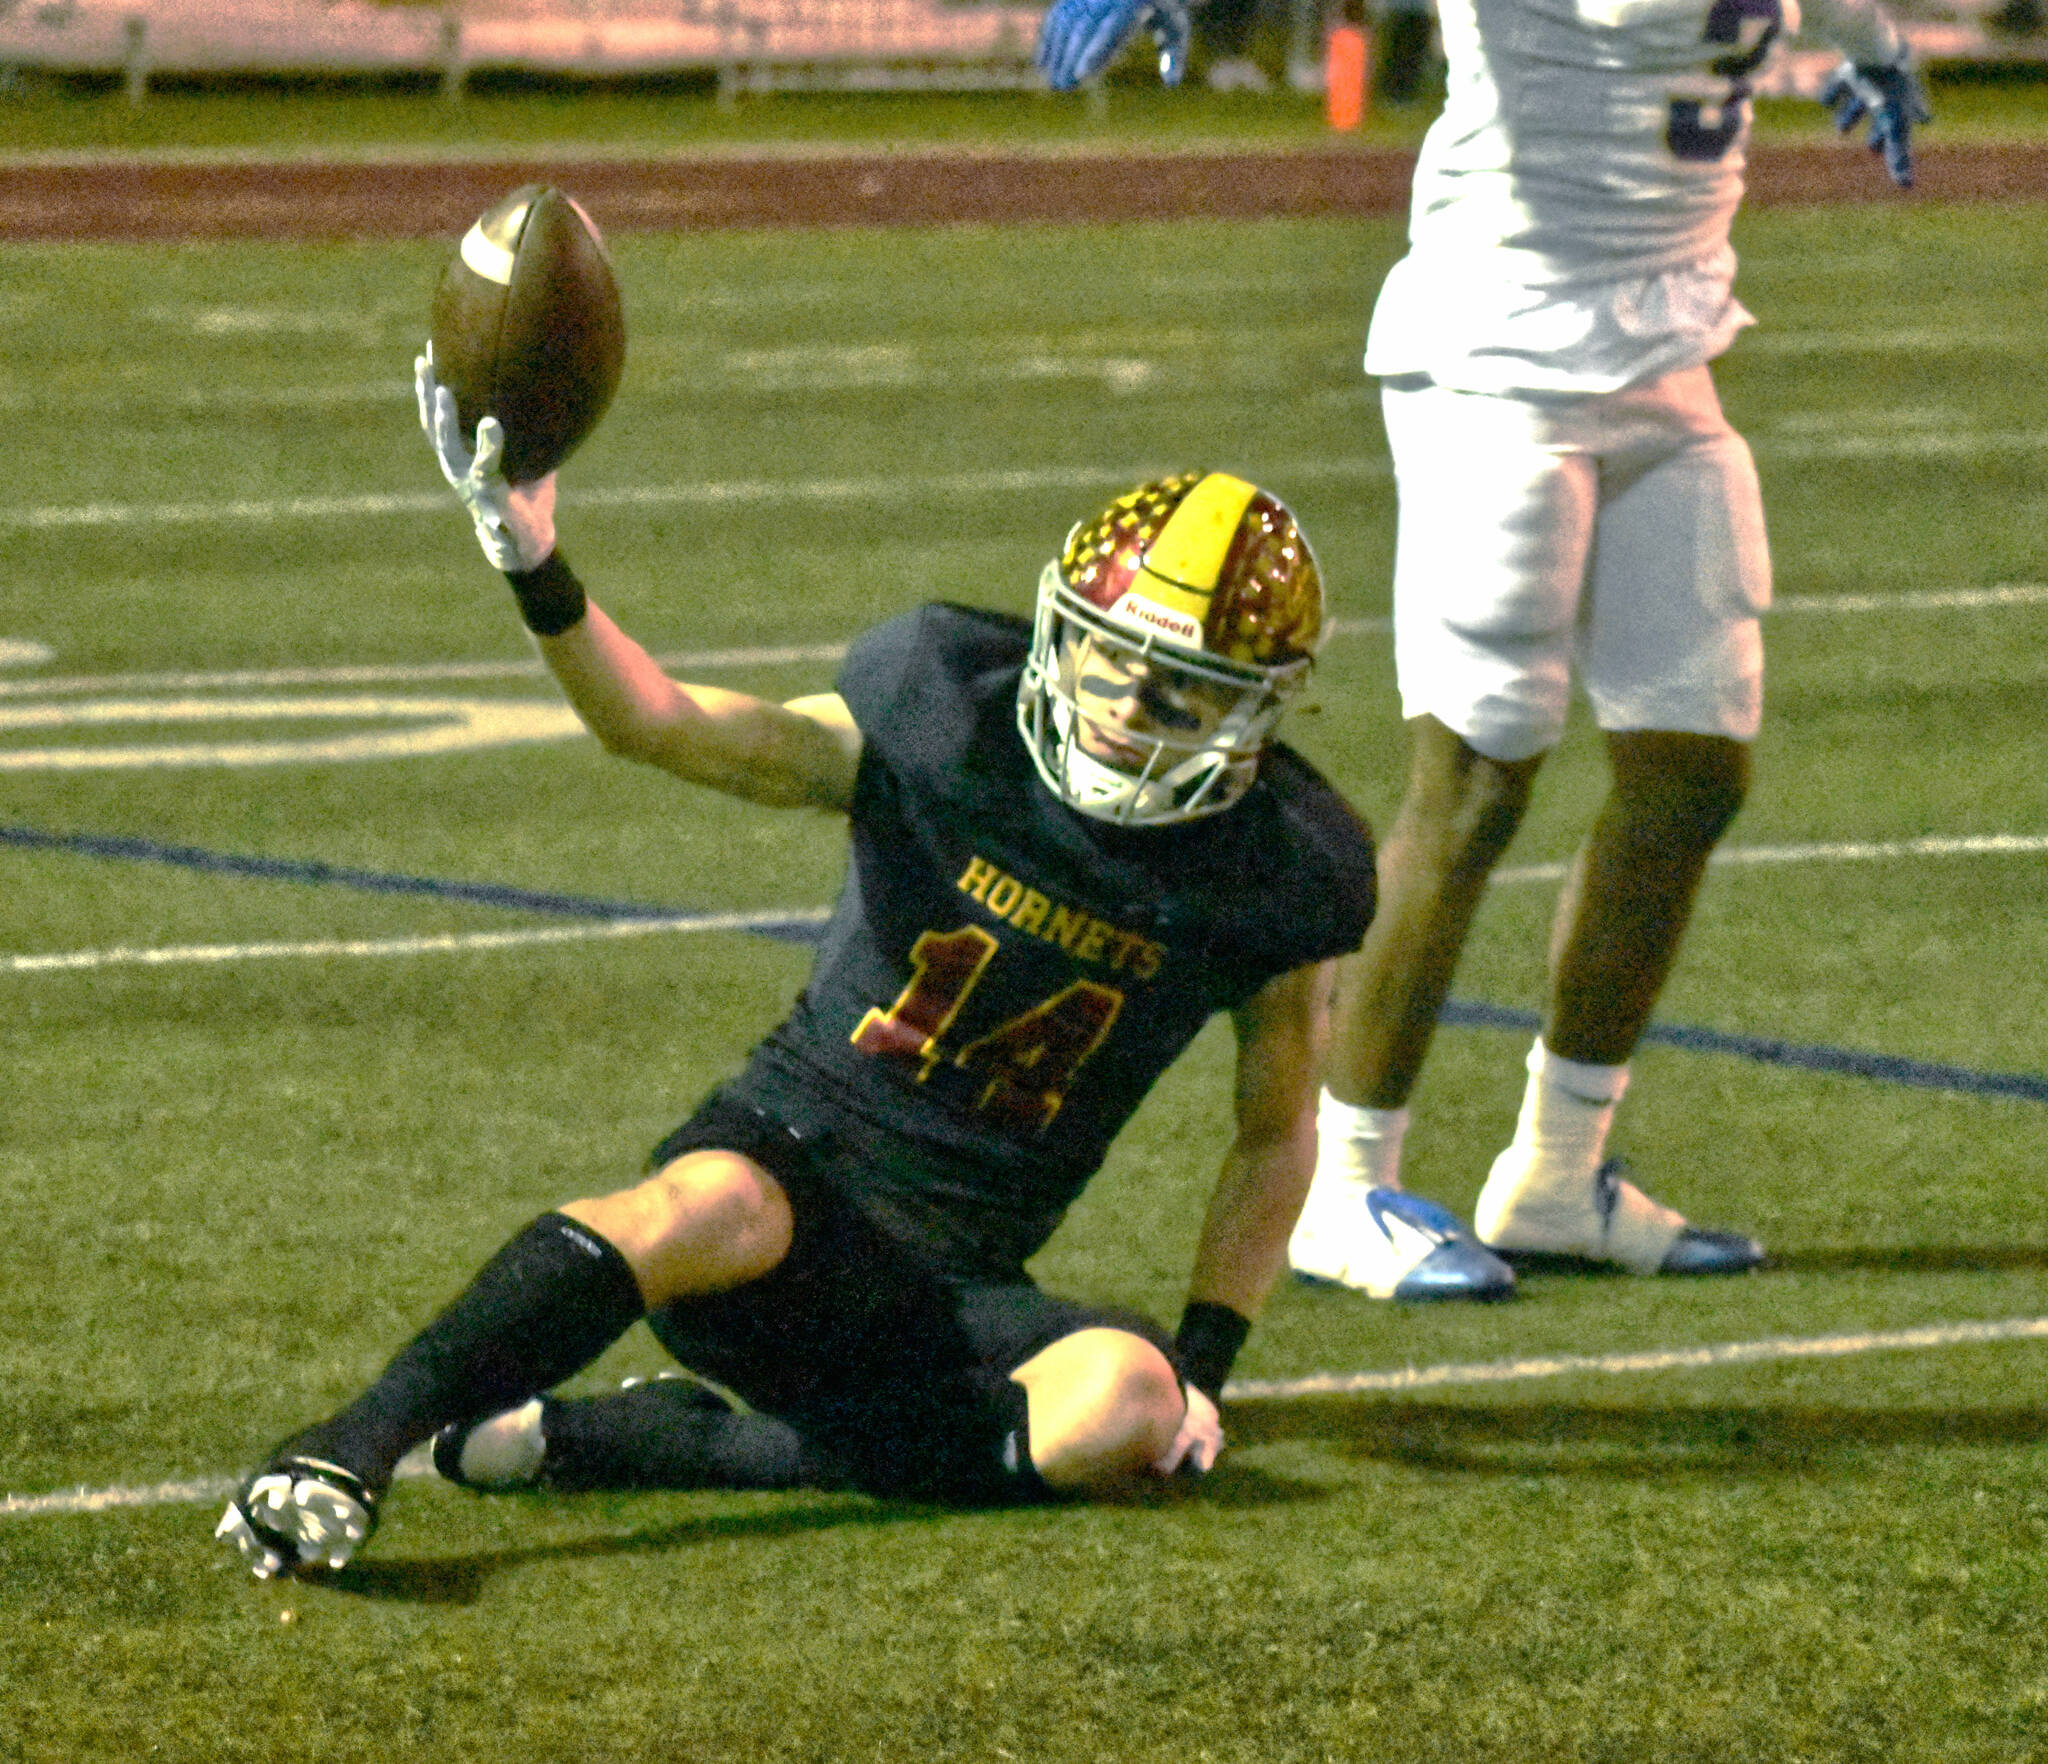 Photo by Kevin Hanson
Enumclaw High senior Landon Brauer was busy Friday night, helping the Hornets register a state quarterfinal victory over Highline. He’s shown here celebrating a long pass reception (which was nullified by penalty).